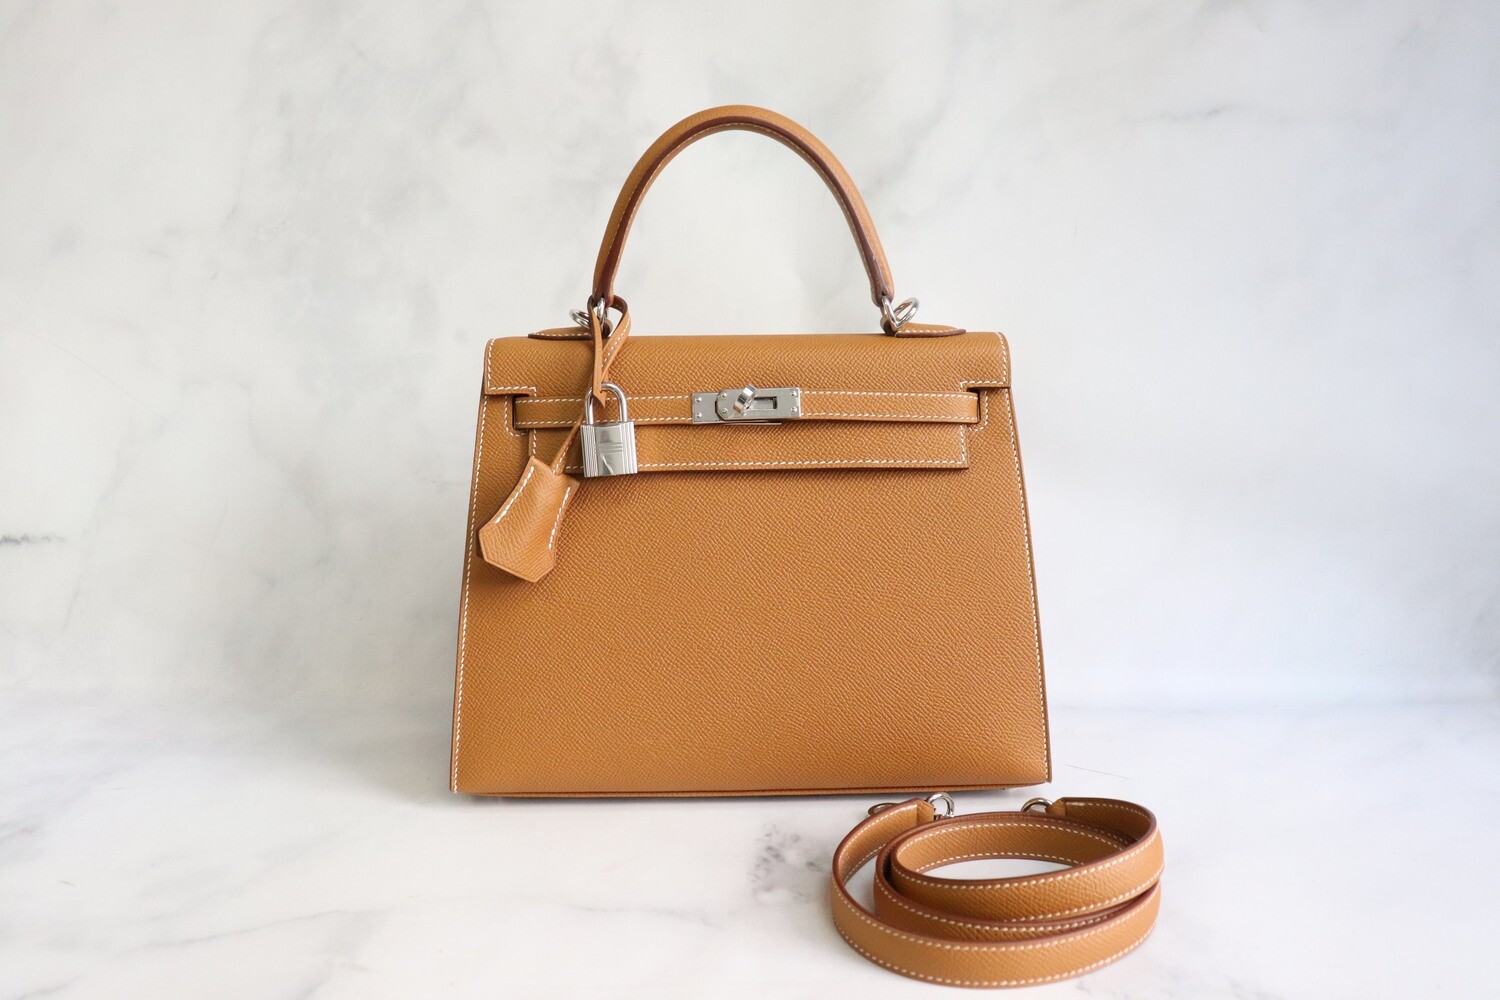 AN ÉTOUPE EPSOM LEATHER SELLIER KELLY 25 WITH PALLADIUM HARDWARE, HERMÈS,  2019